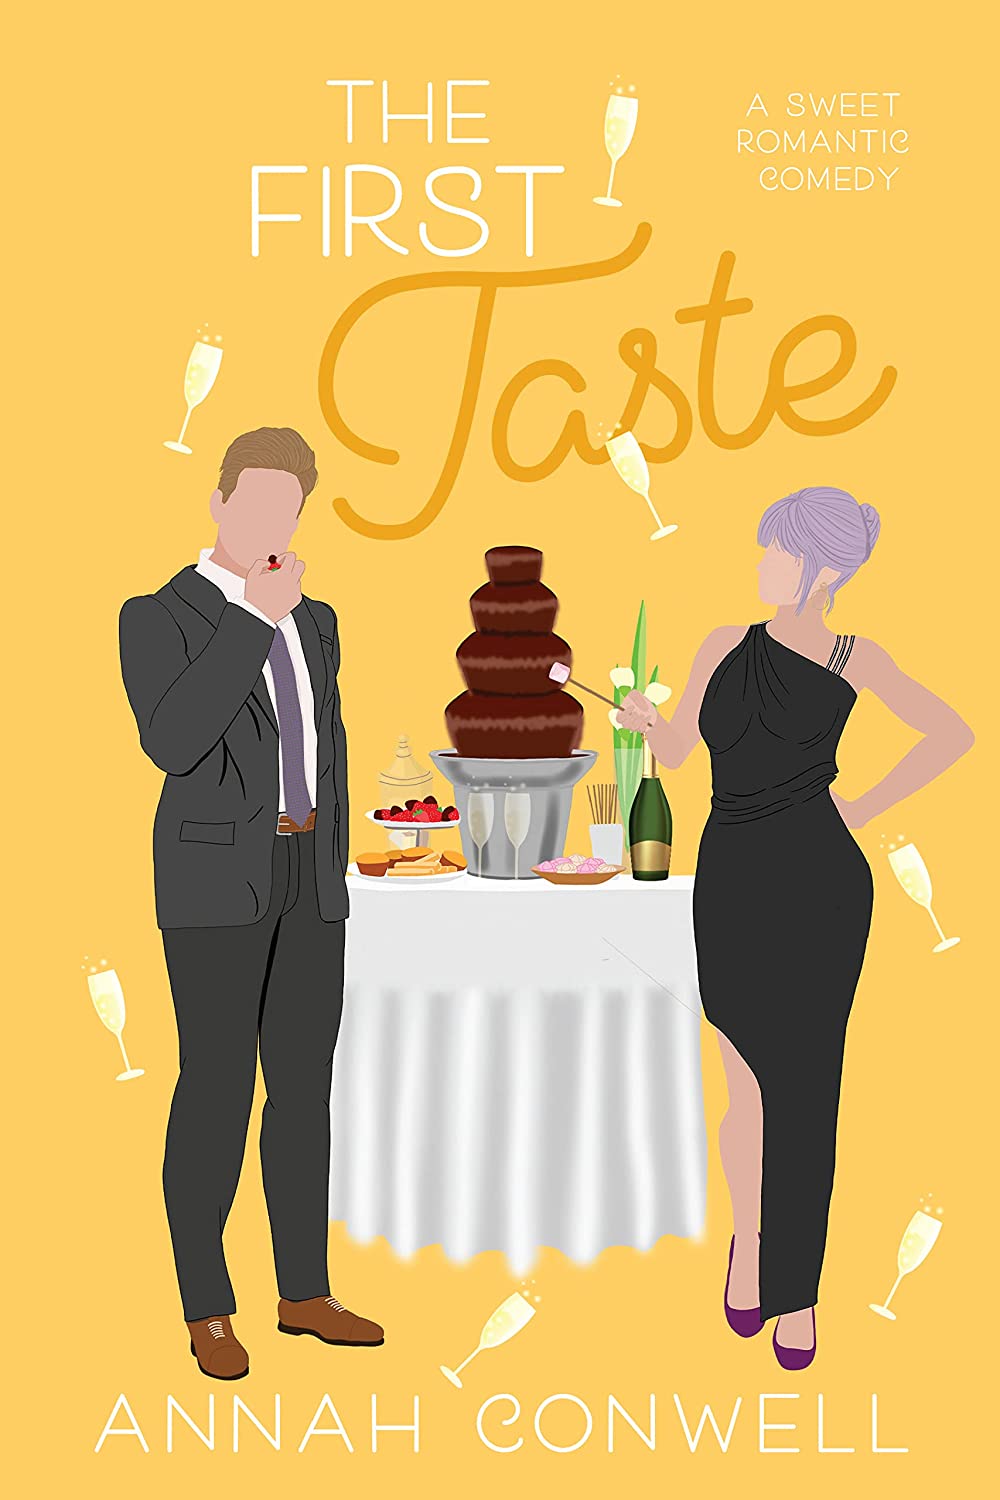 The First Taste by Annah Conwell PDF Download Audio Book